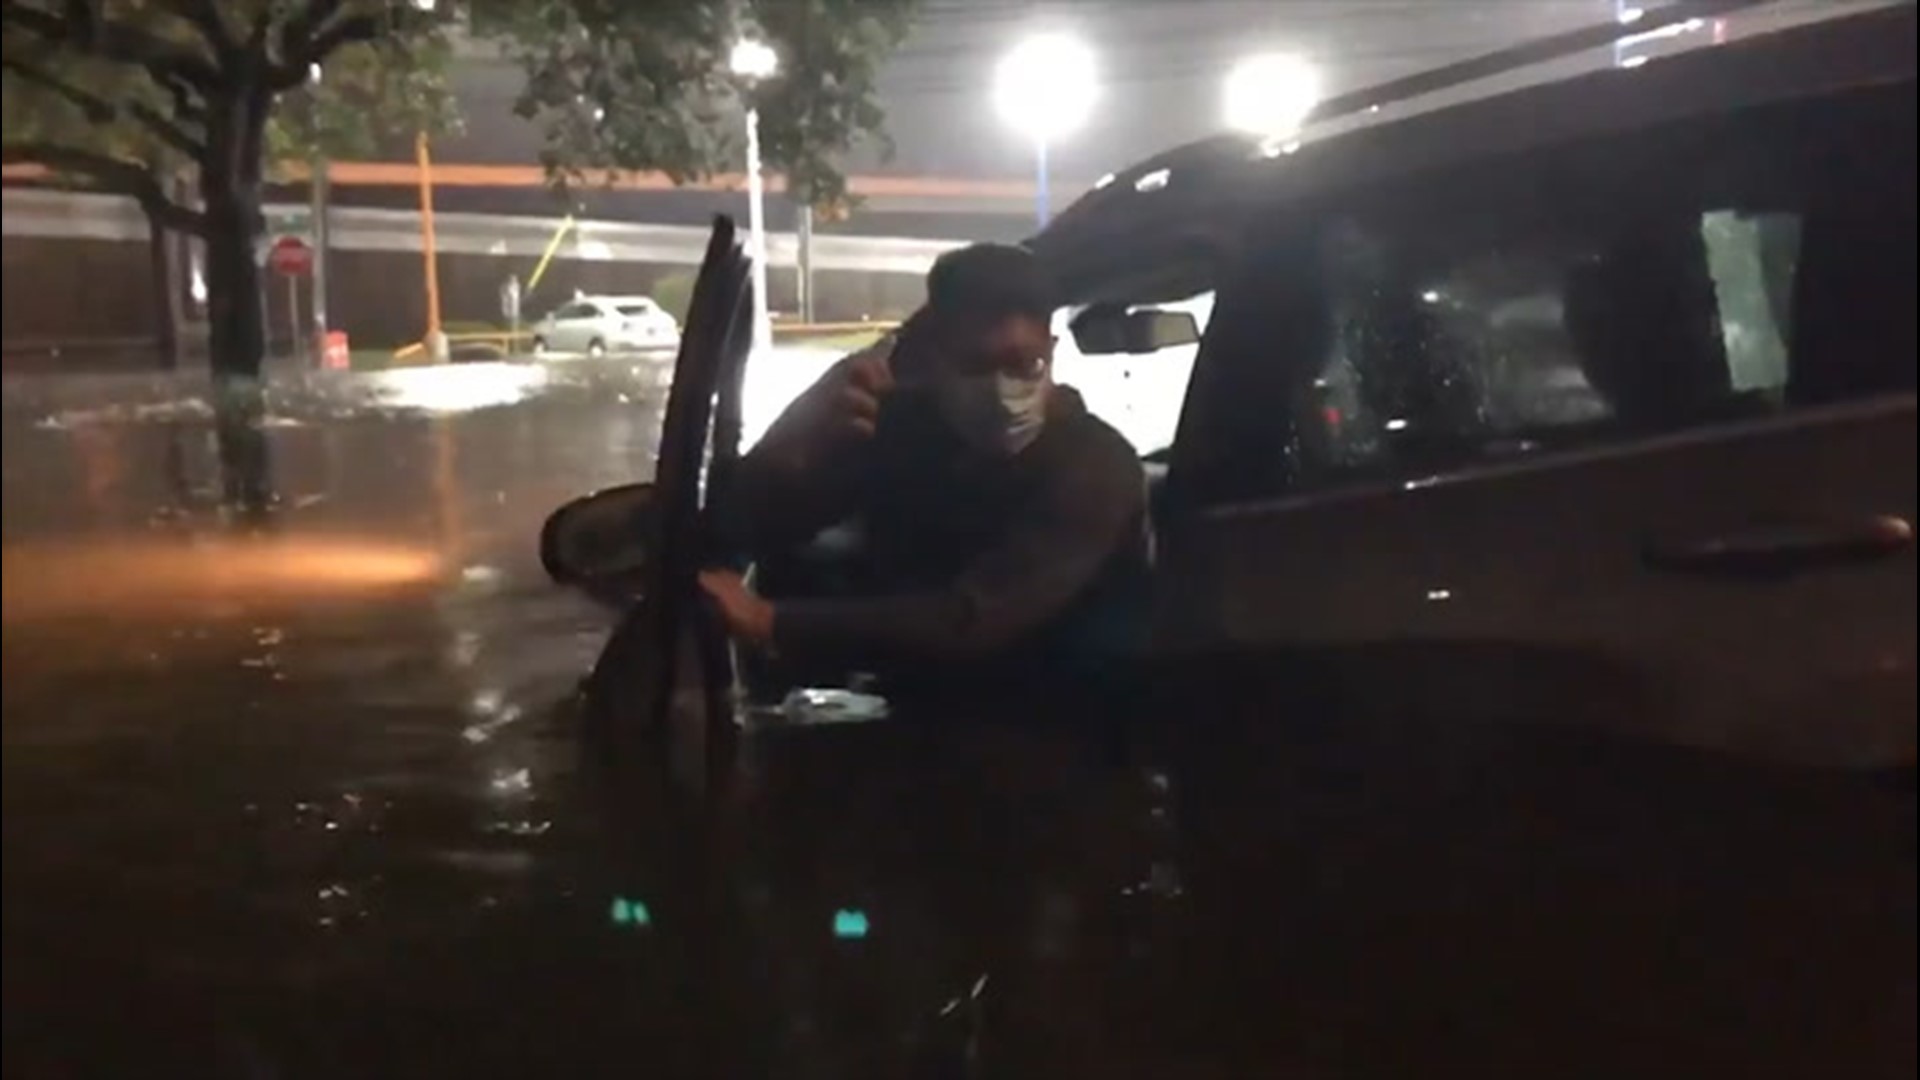 A man escaped from his SUV after it became trapped in floodwaters in Houston, Texas, on Sept. 21, as Tropical Storm Beta lashed the area, triggering flash flooding.